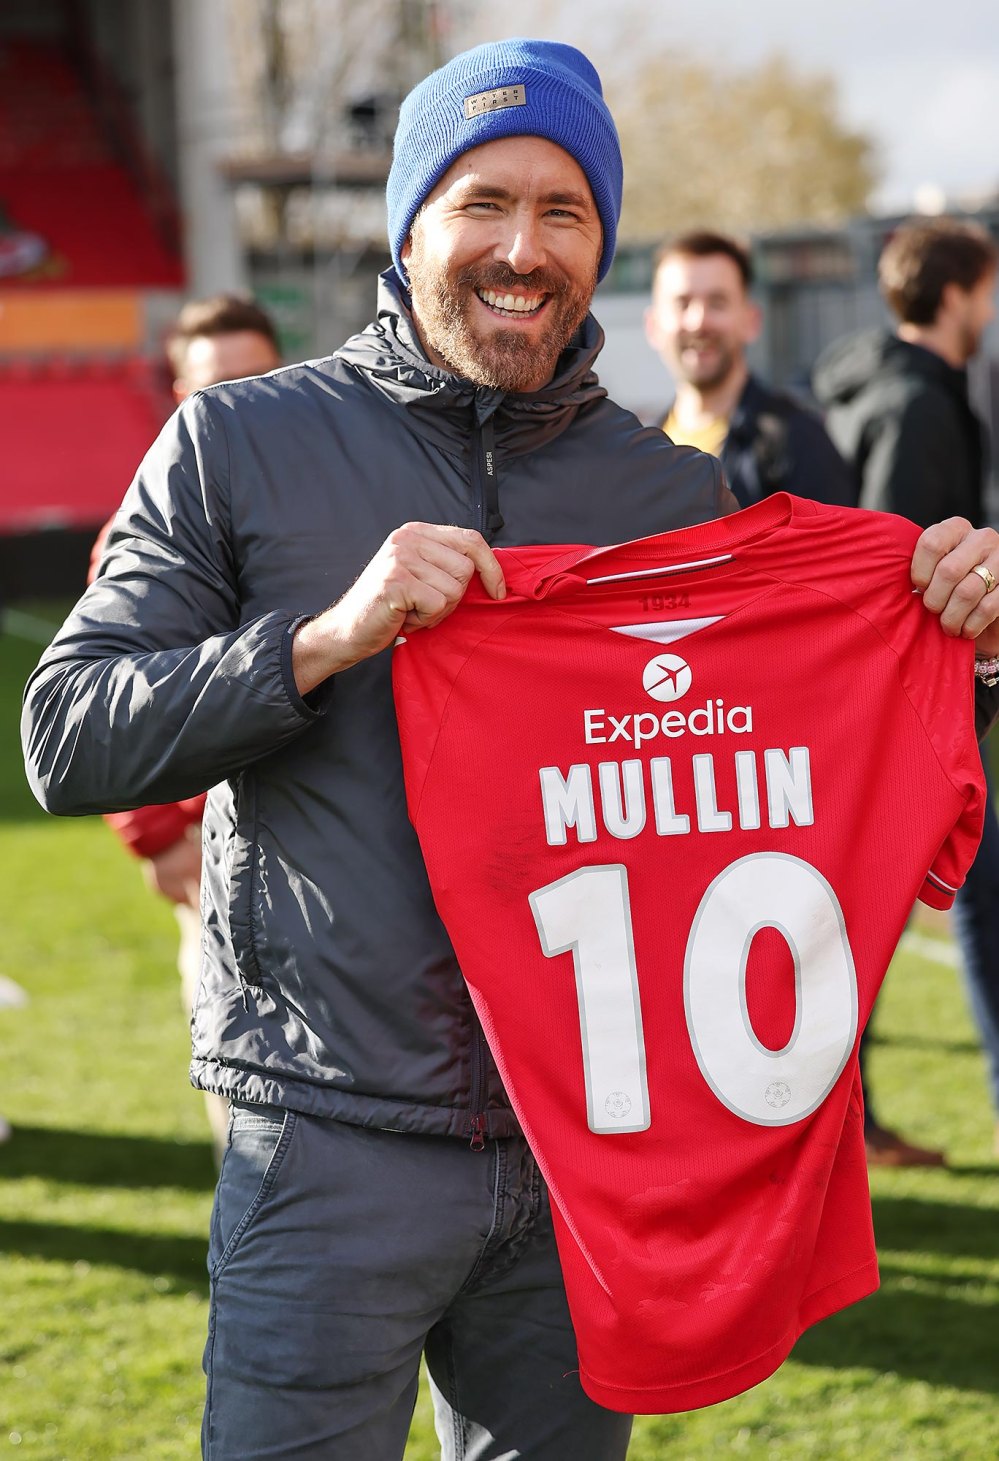 Ryan Reynolds Offers Lungs to Player Paul Mullin After 'Welcome to Wrexham' Season 3 Premiere Injury